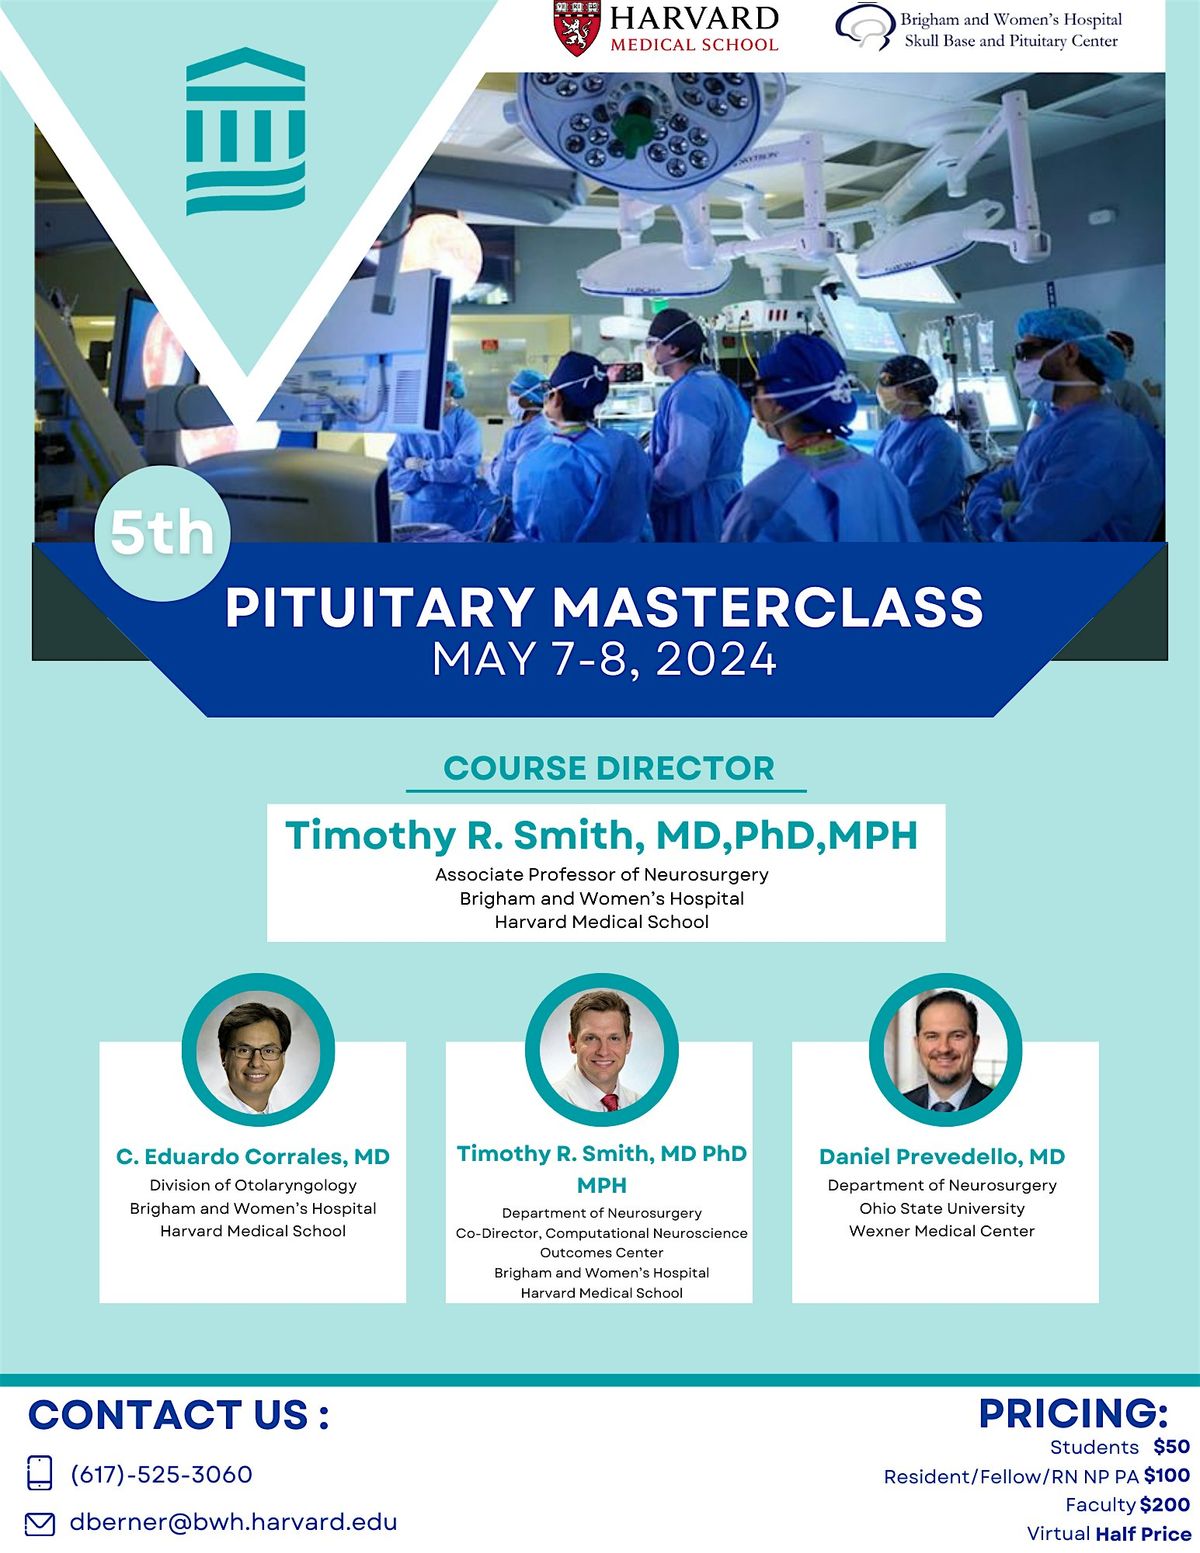 5th Pituitary Masterclass